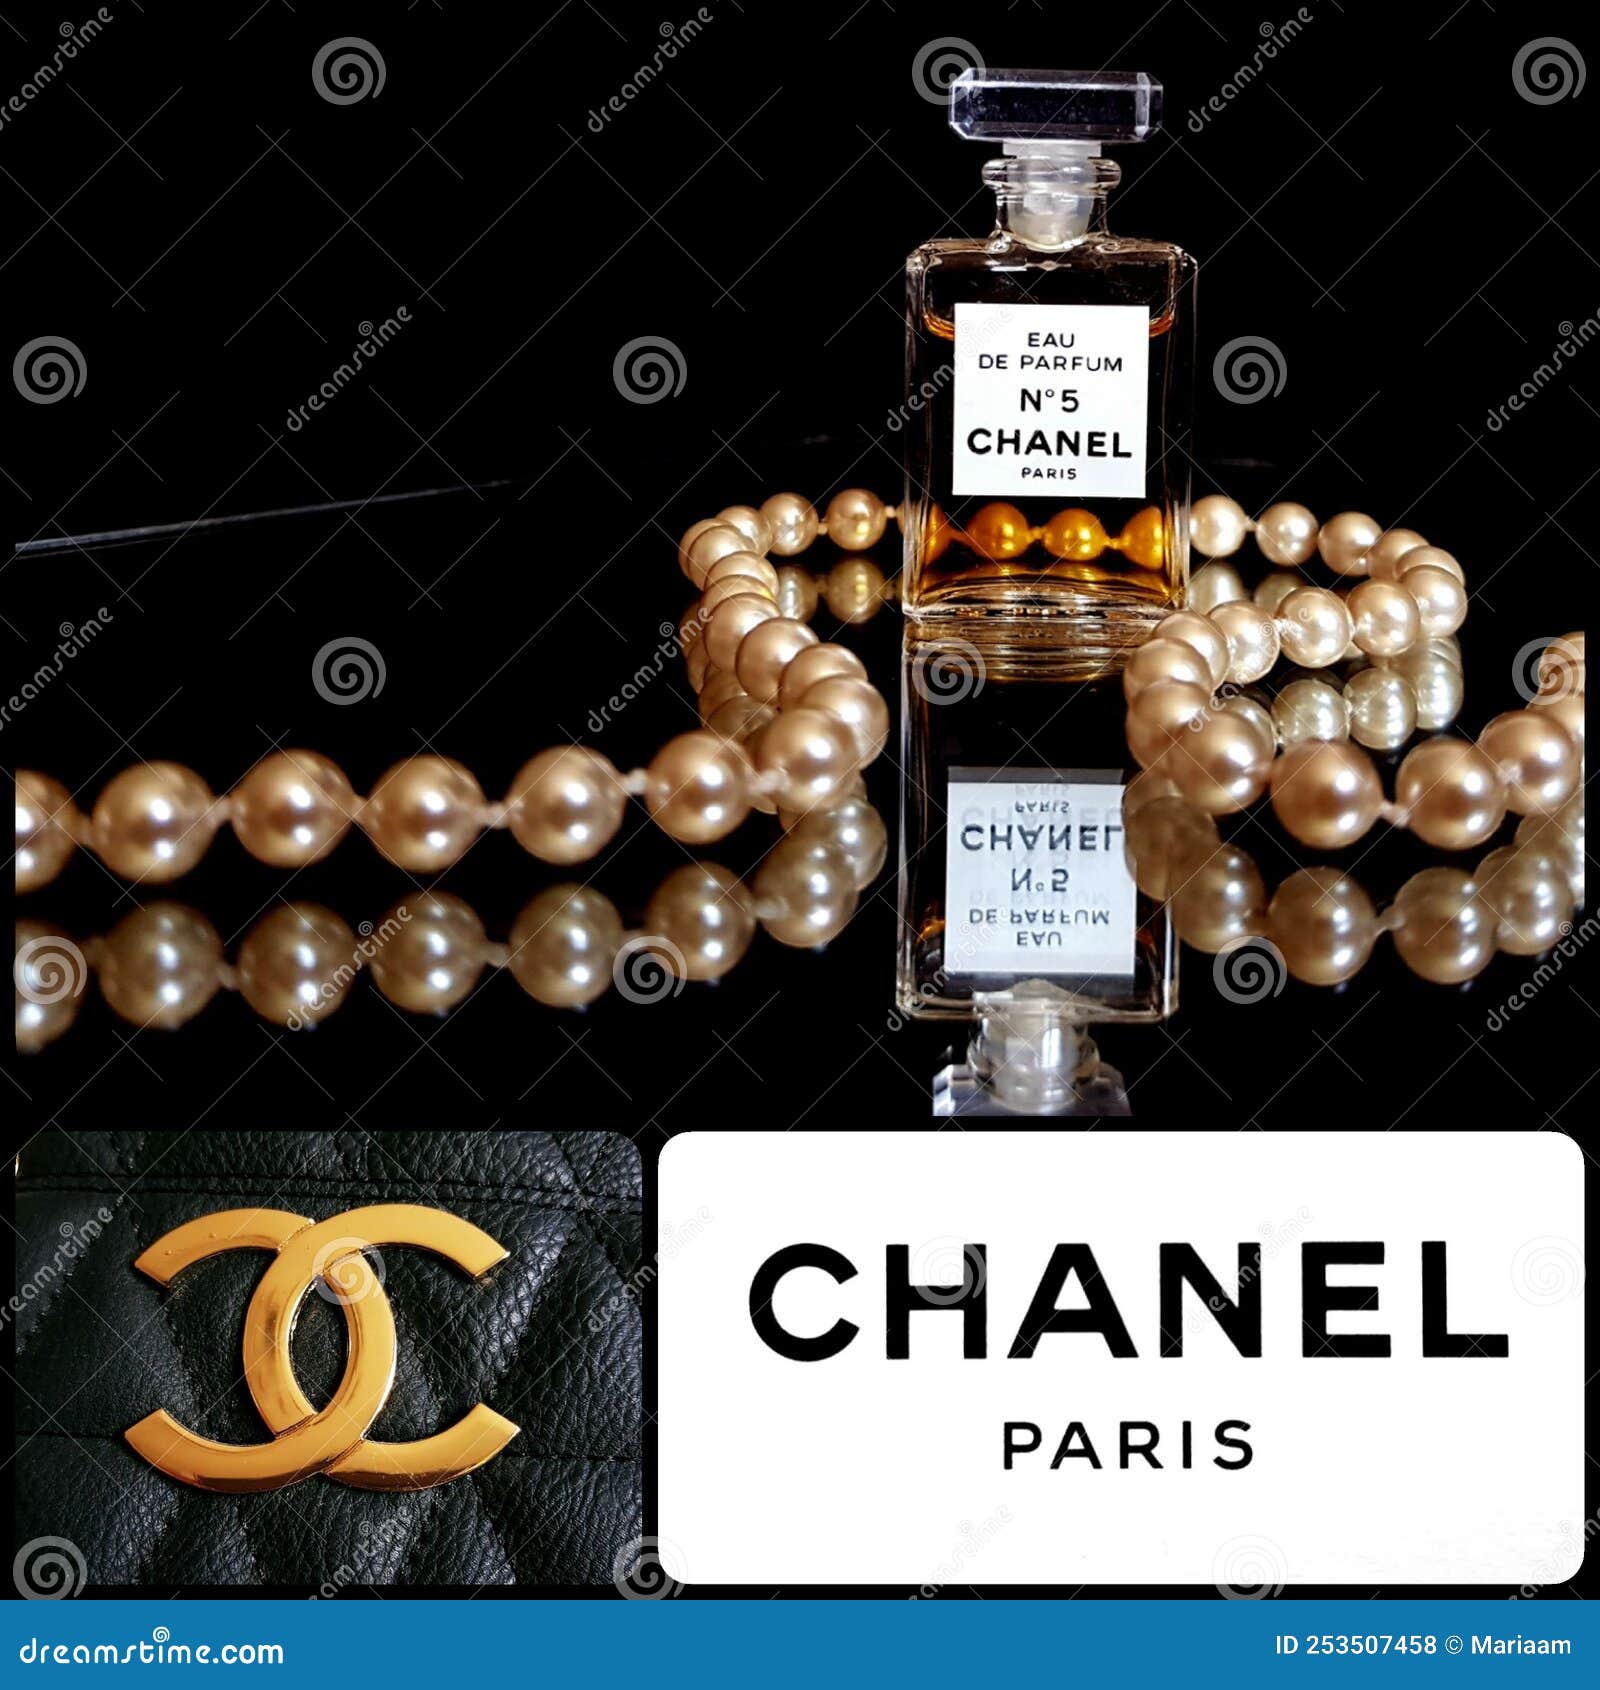 Chanel Paris Collage with Brand Logo and Perfume Bottle â„– 5. Editorial  Stock Photo - Image of collage, number: 253507458